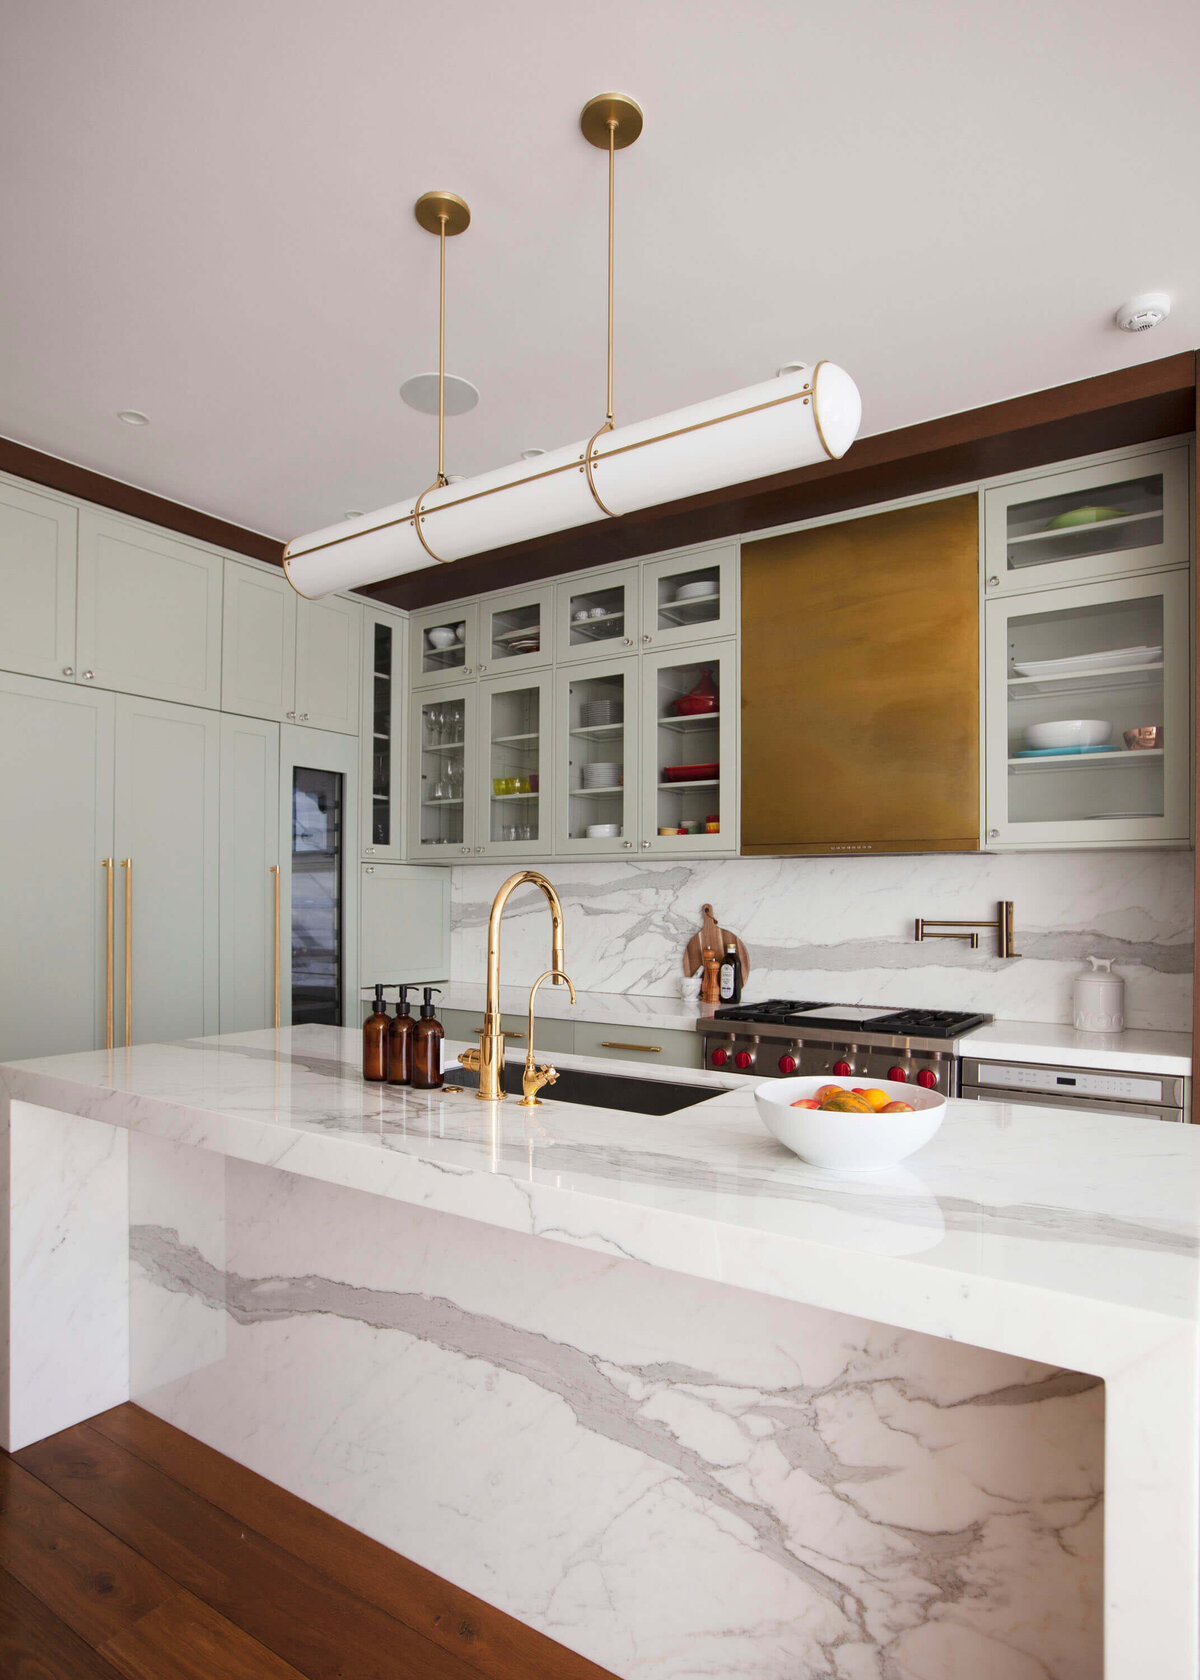 Luxurious kitchen design with marble countertops and gold accents